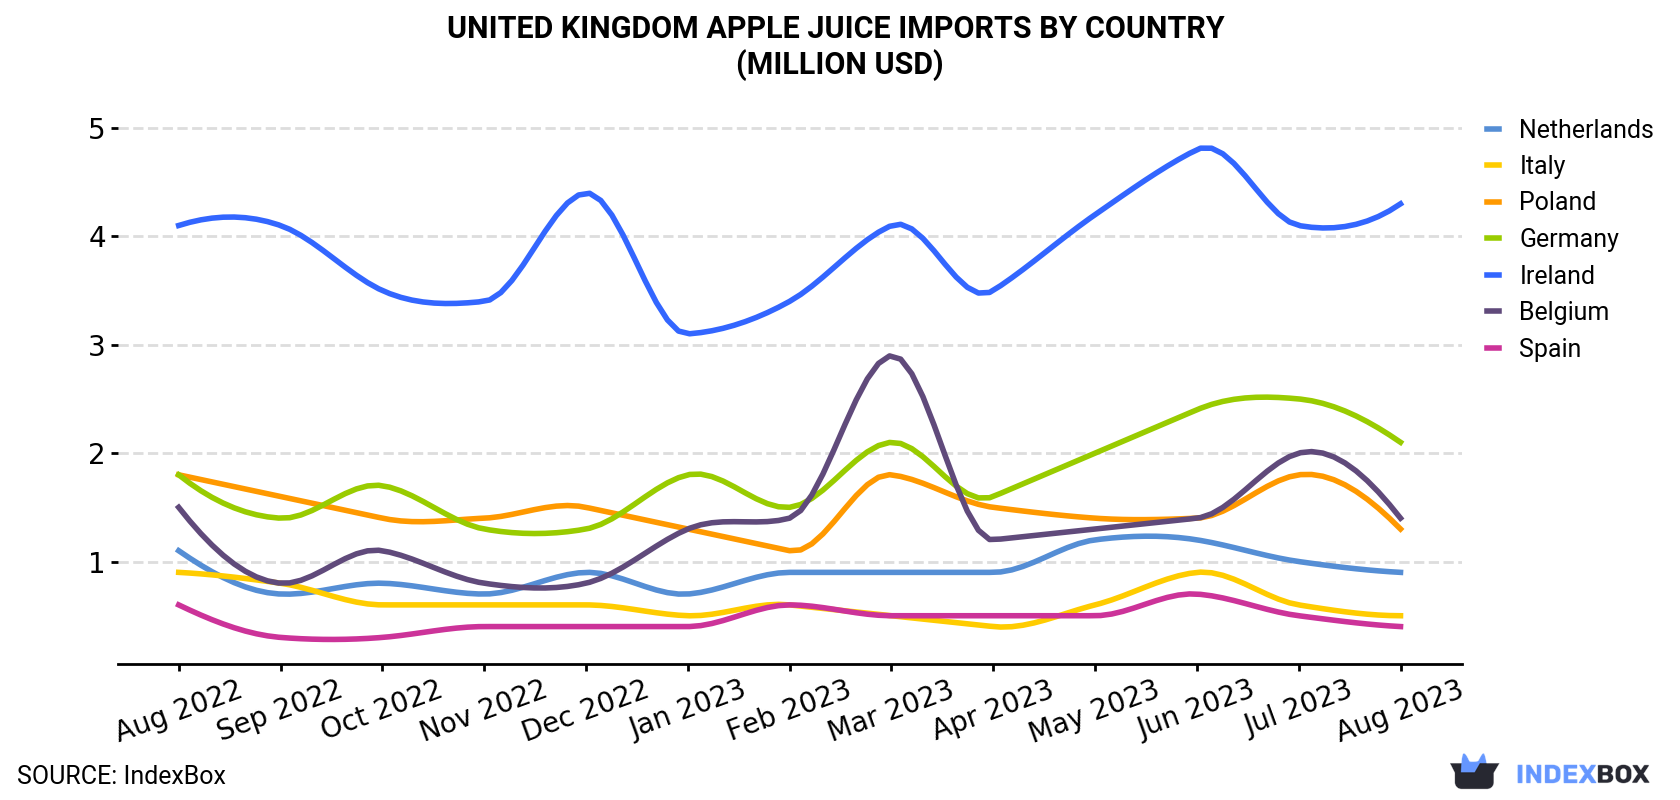 United Kingdom Apple Juice Imports By Country (Million USD)